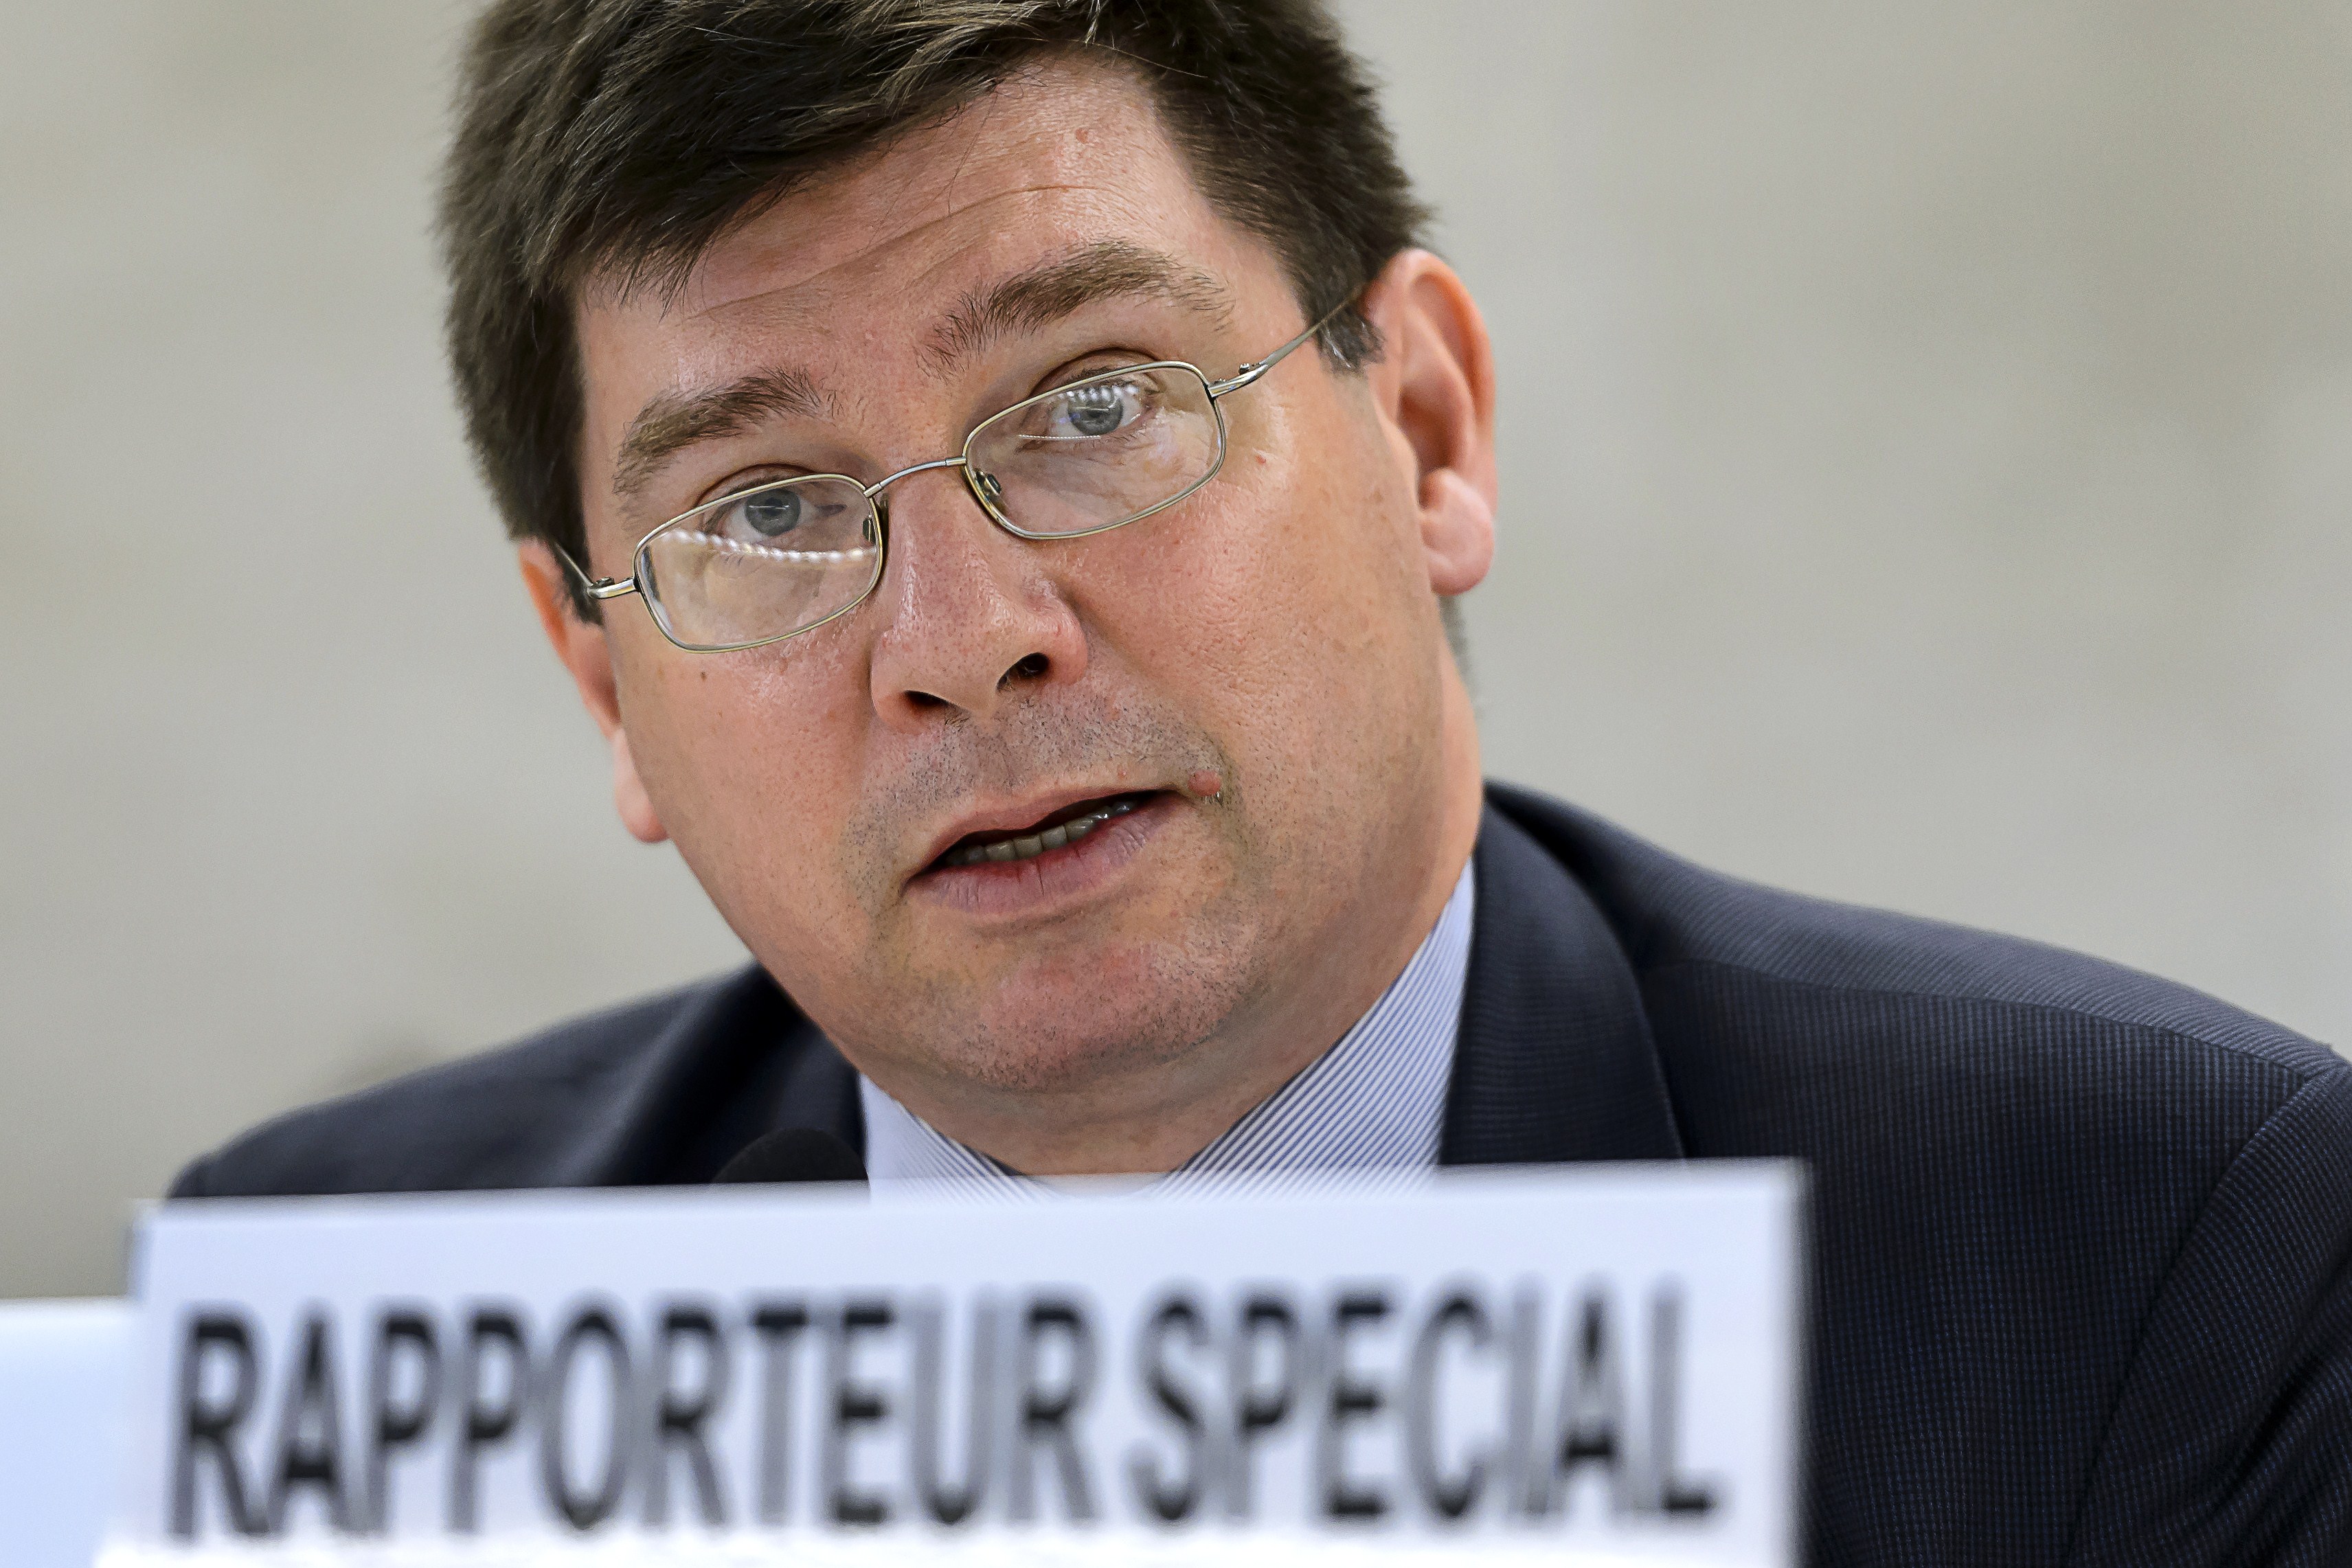 U.N. Special Rapporteur on human rights of migrants Fran&ccedil;ois Cr&eacute;peau delivers his speech during a session of the U.N. Human Rights Council on June 15, 2015, in Geneva (Fabrice Coffrini&mdash;AFP/Getty Images)